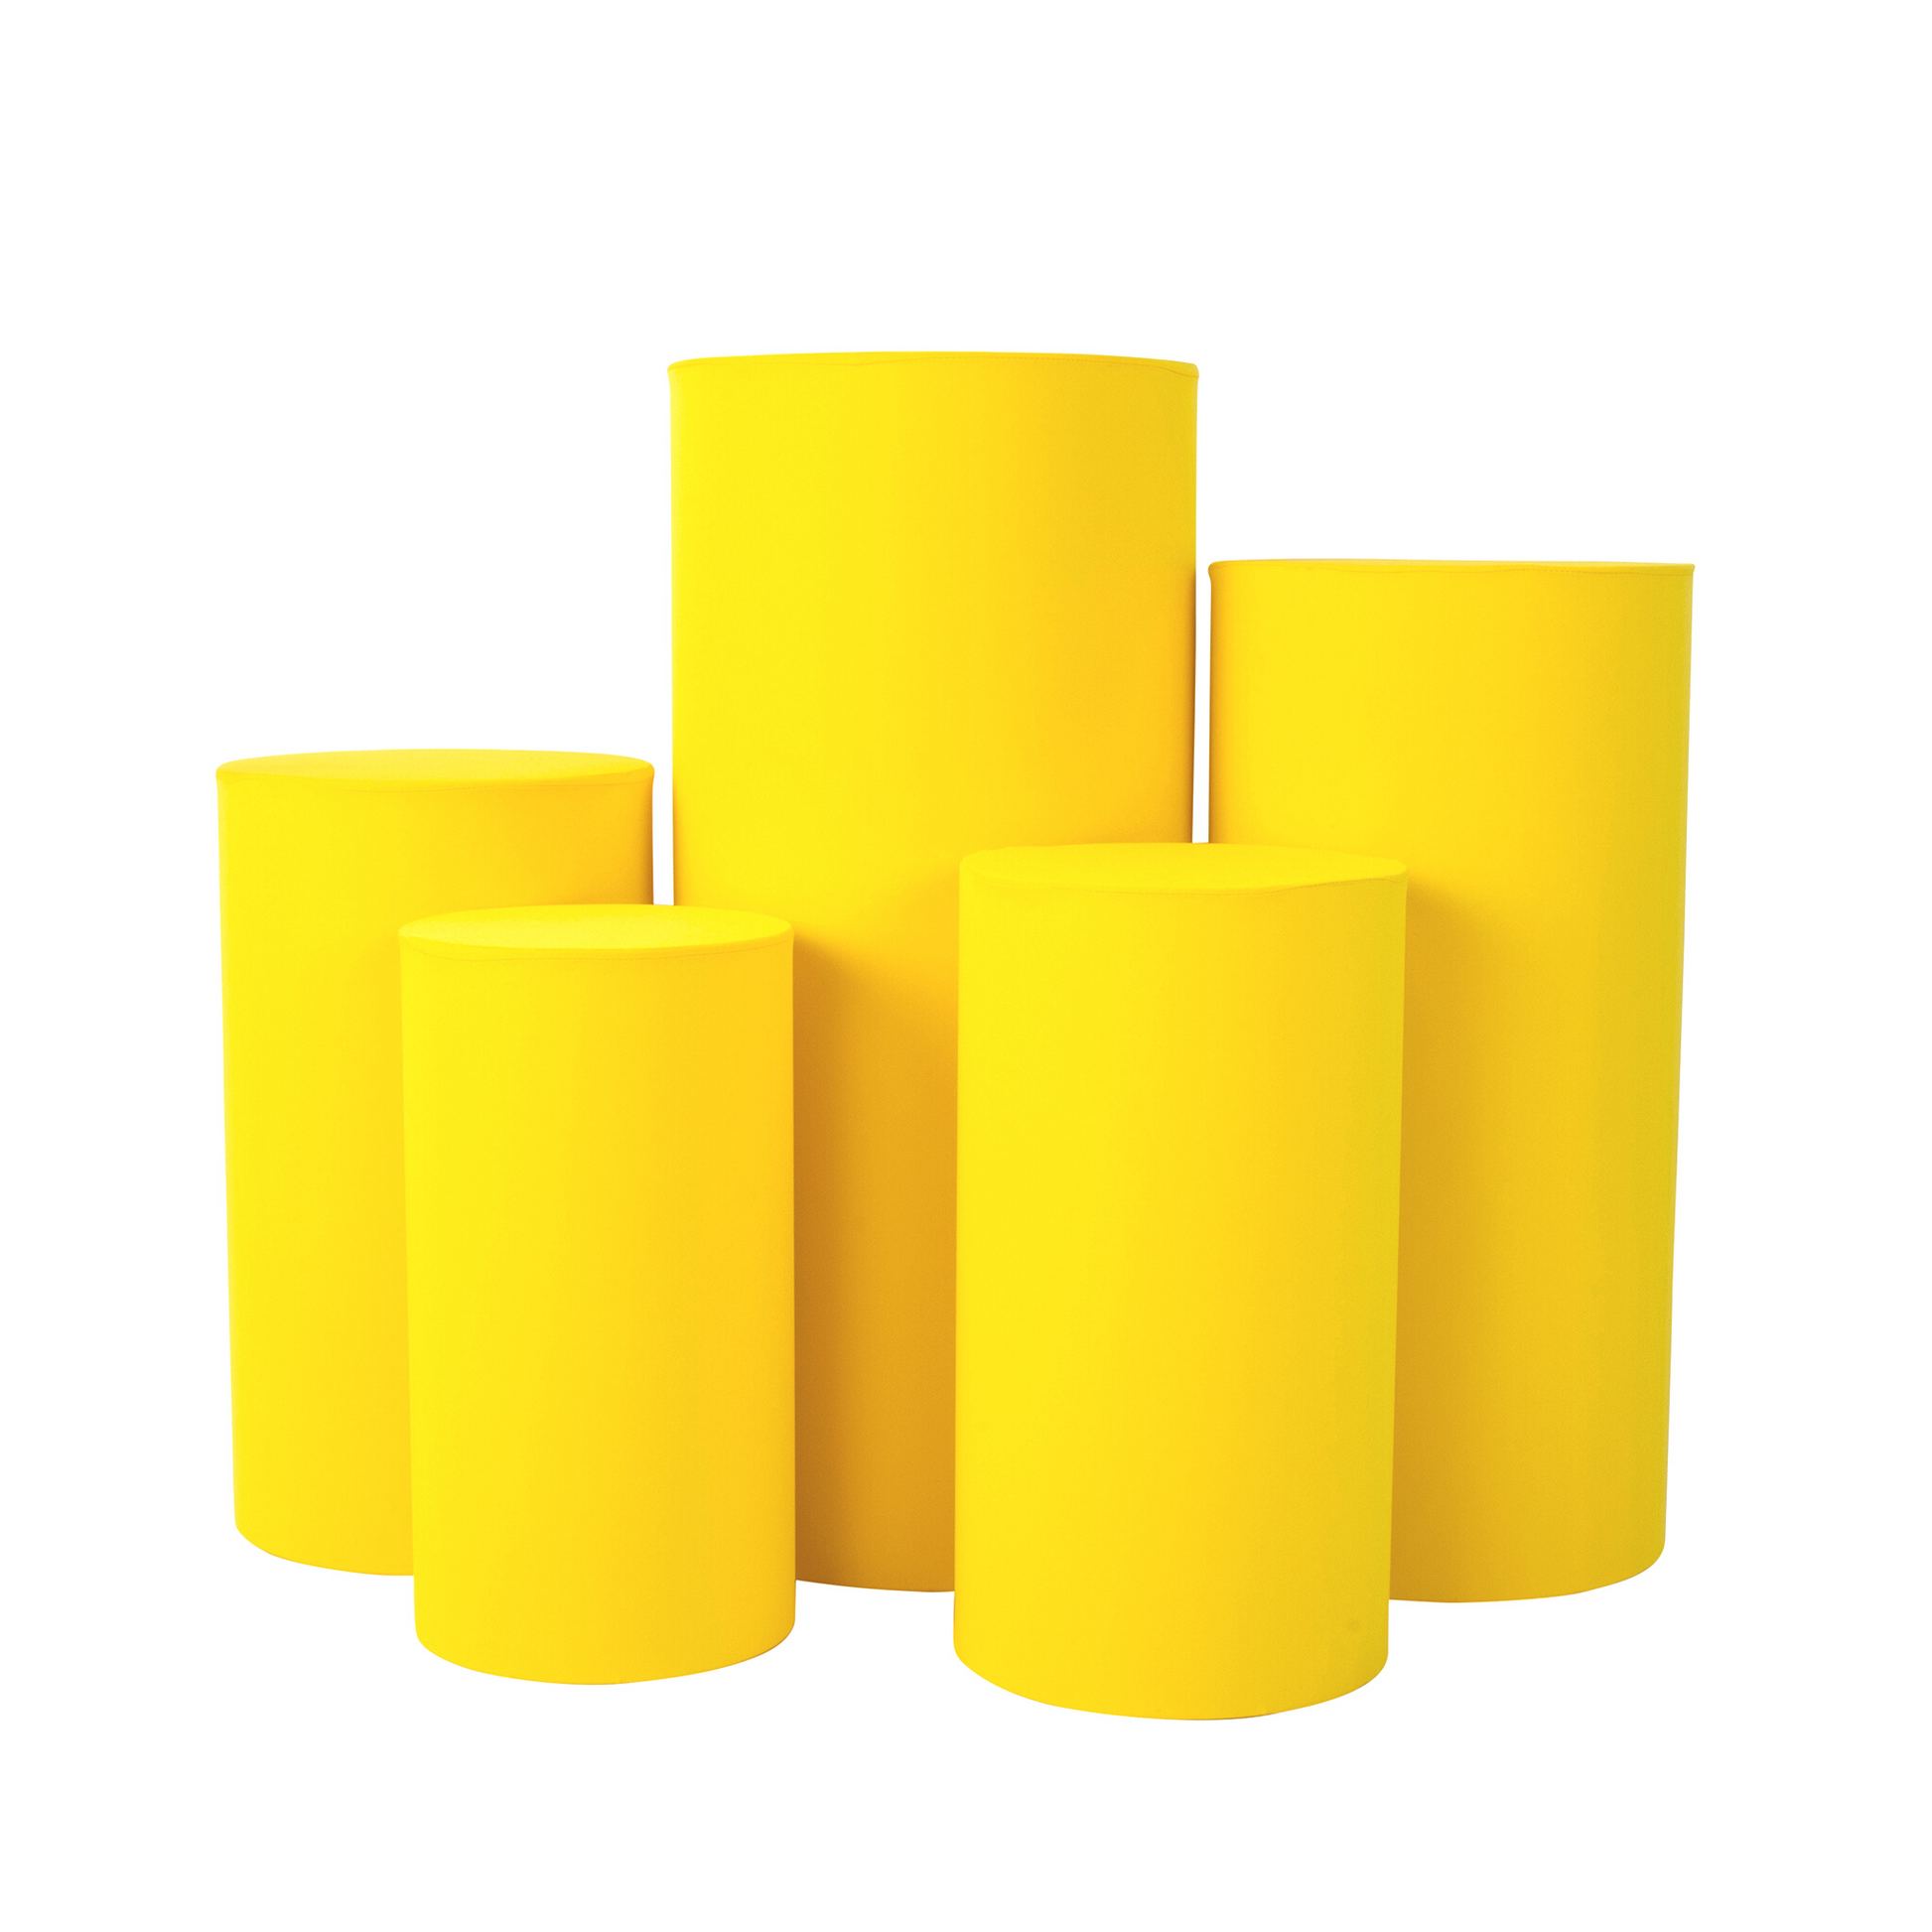 Spandex Pillar Covers for Metal Cylinder Pedestal Stands 5 pcs/set - Canary Yellow